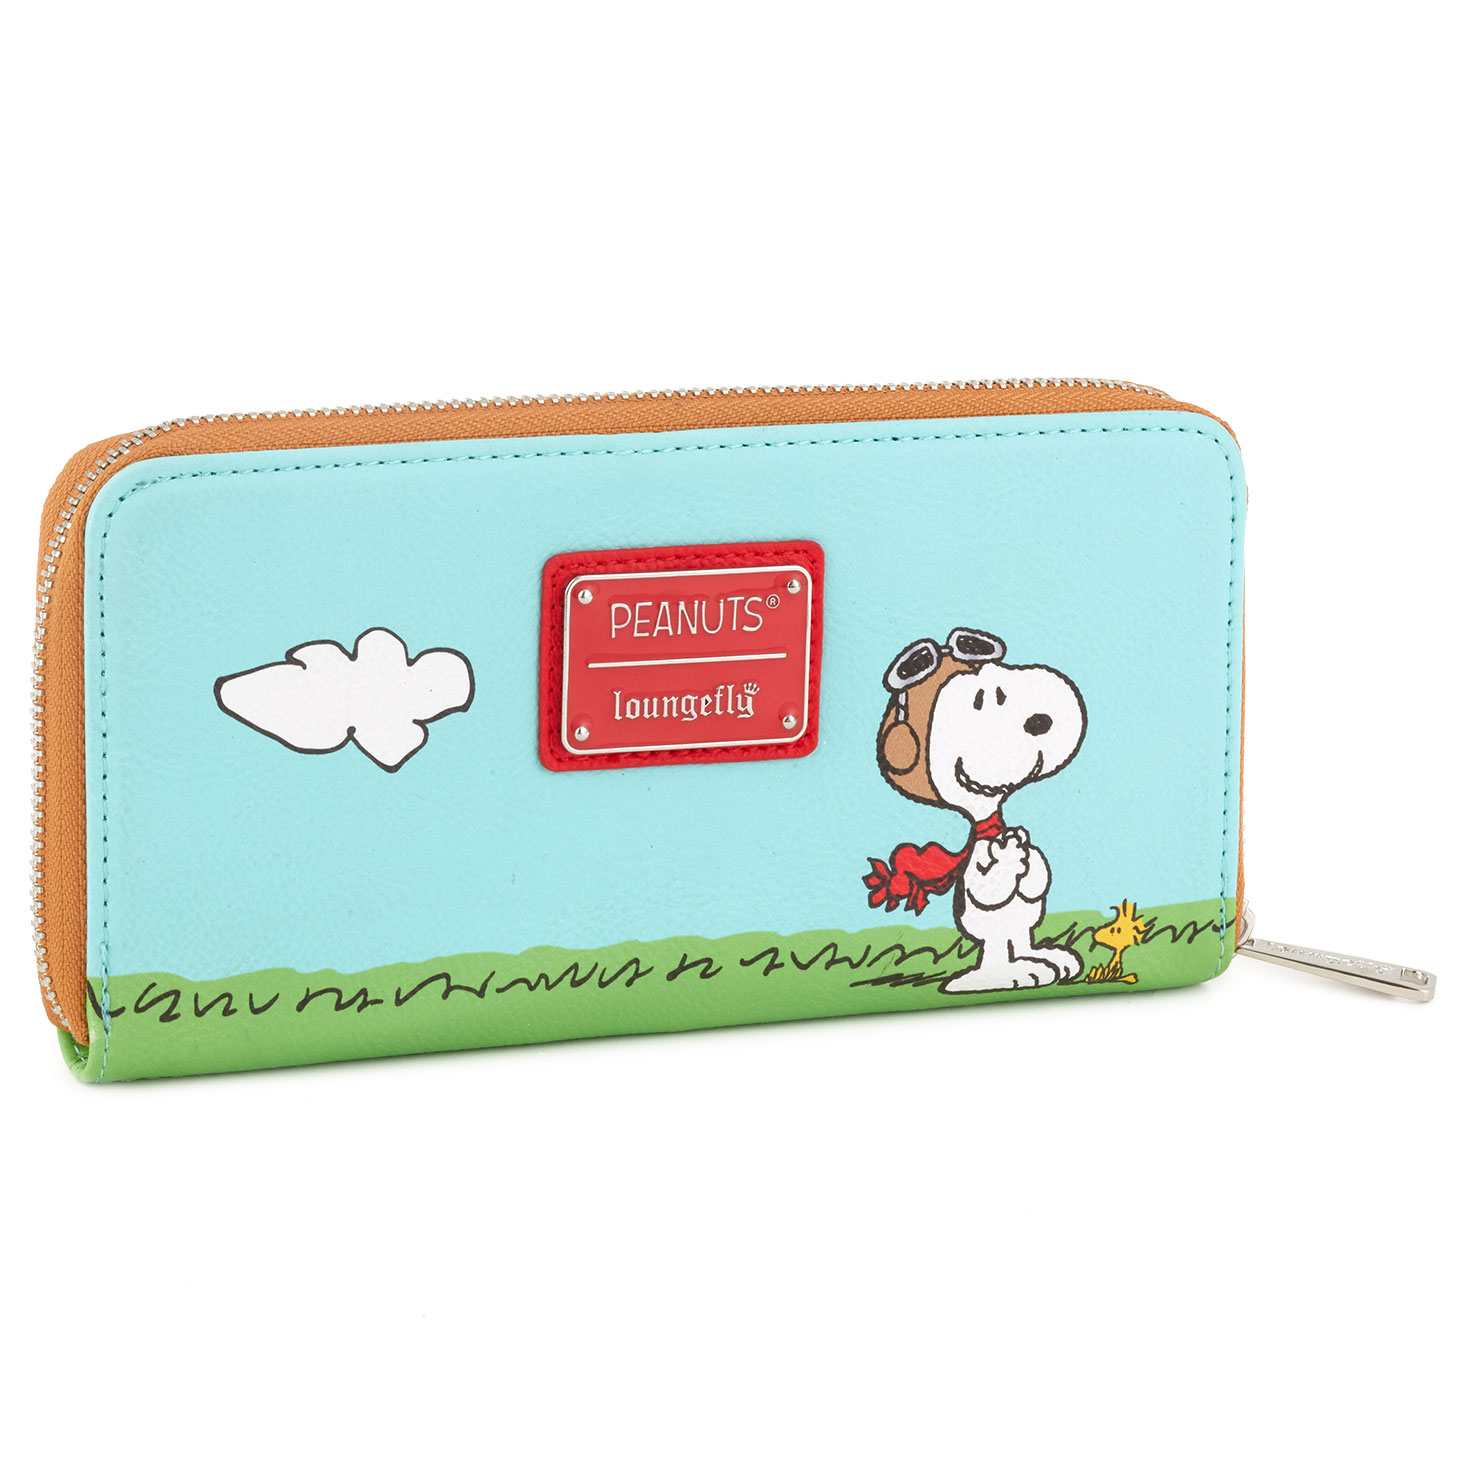 Loungefly Peanuts Snoopy vs. the Red Baron Wallet for only USD 40.00 |  Hallmark